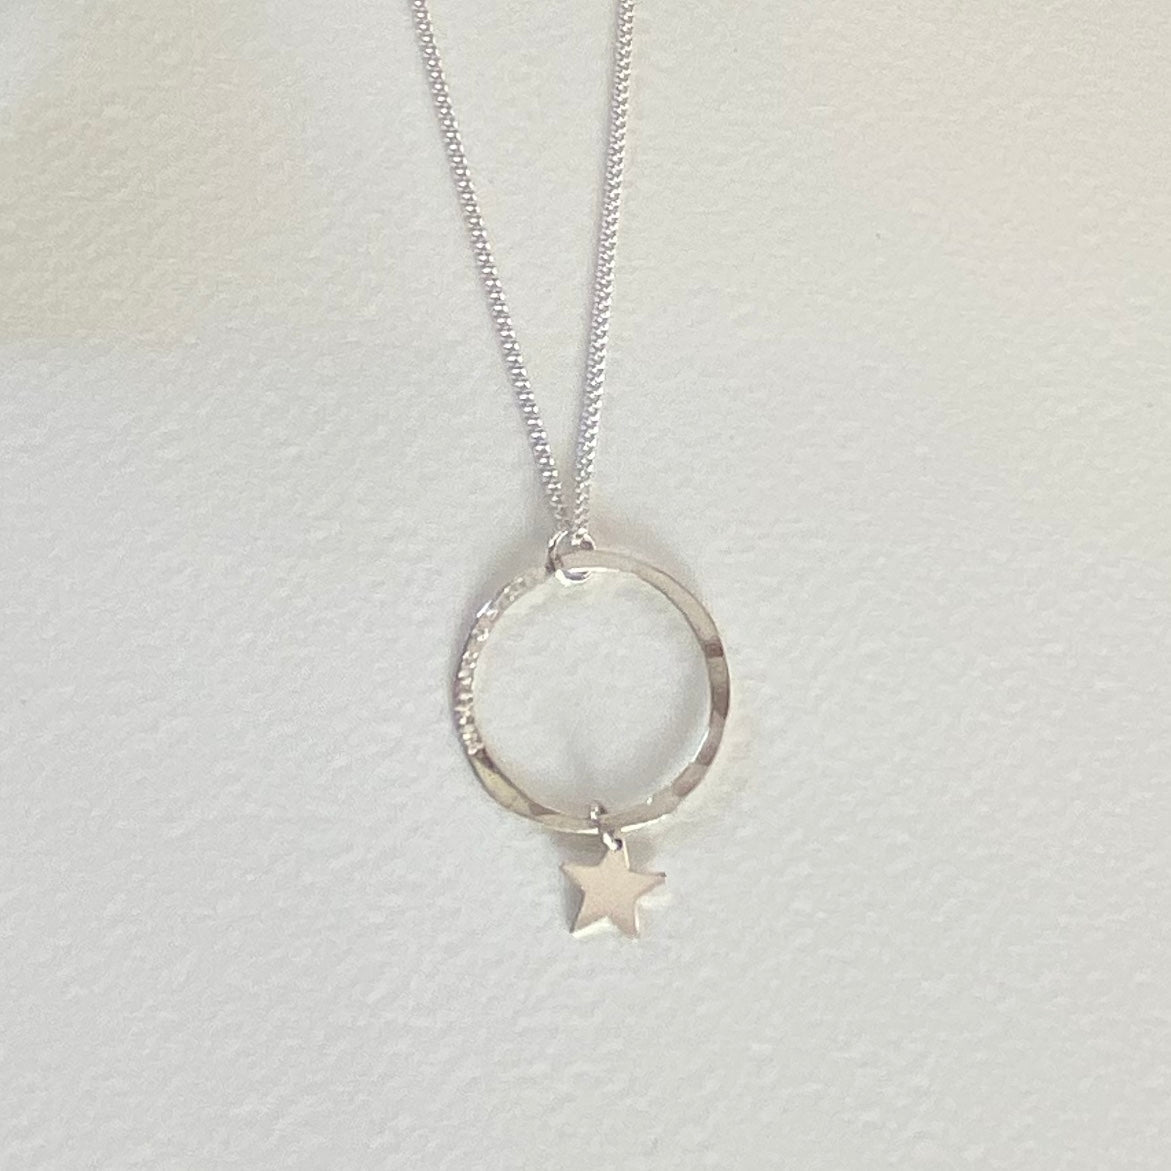 Wish On A Star Hoop Necklace - The Nancy Smillie Shop - Art, Jewellery & Designer Gifts Glasgow